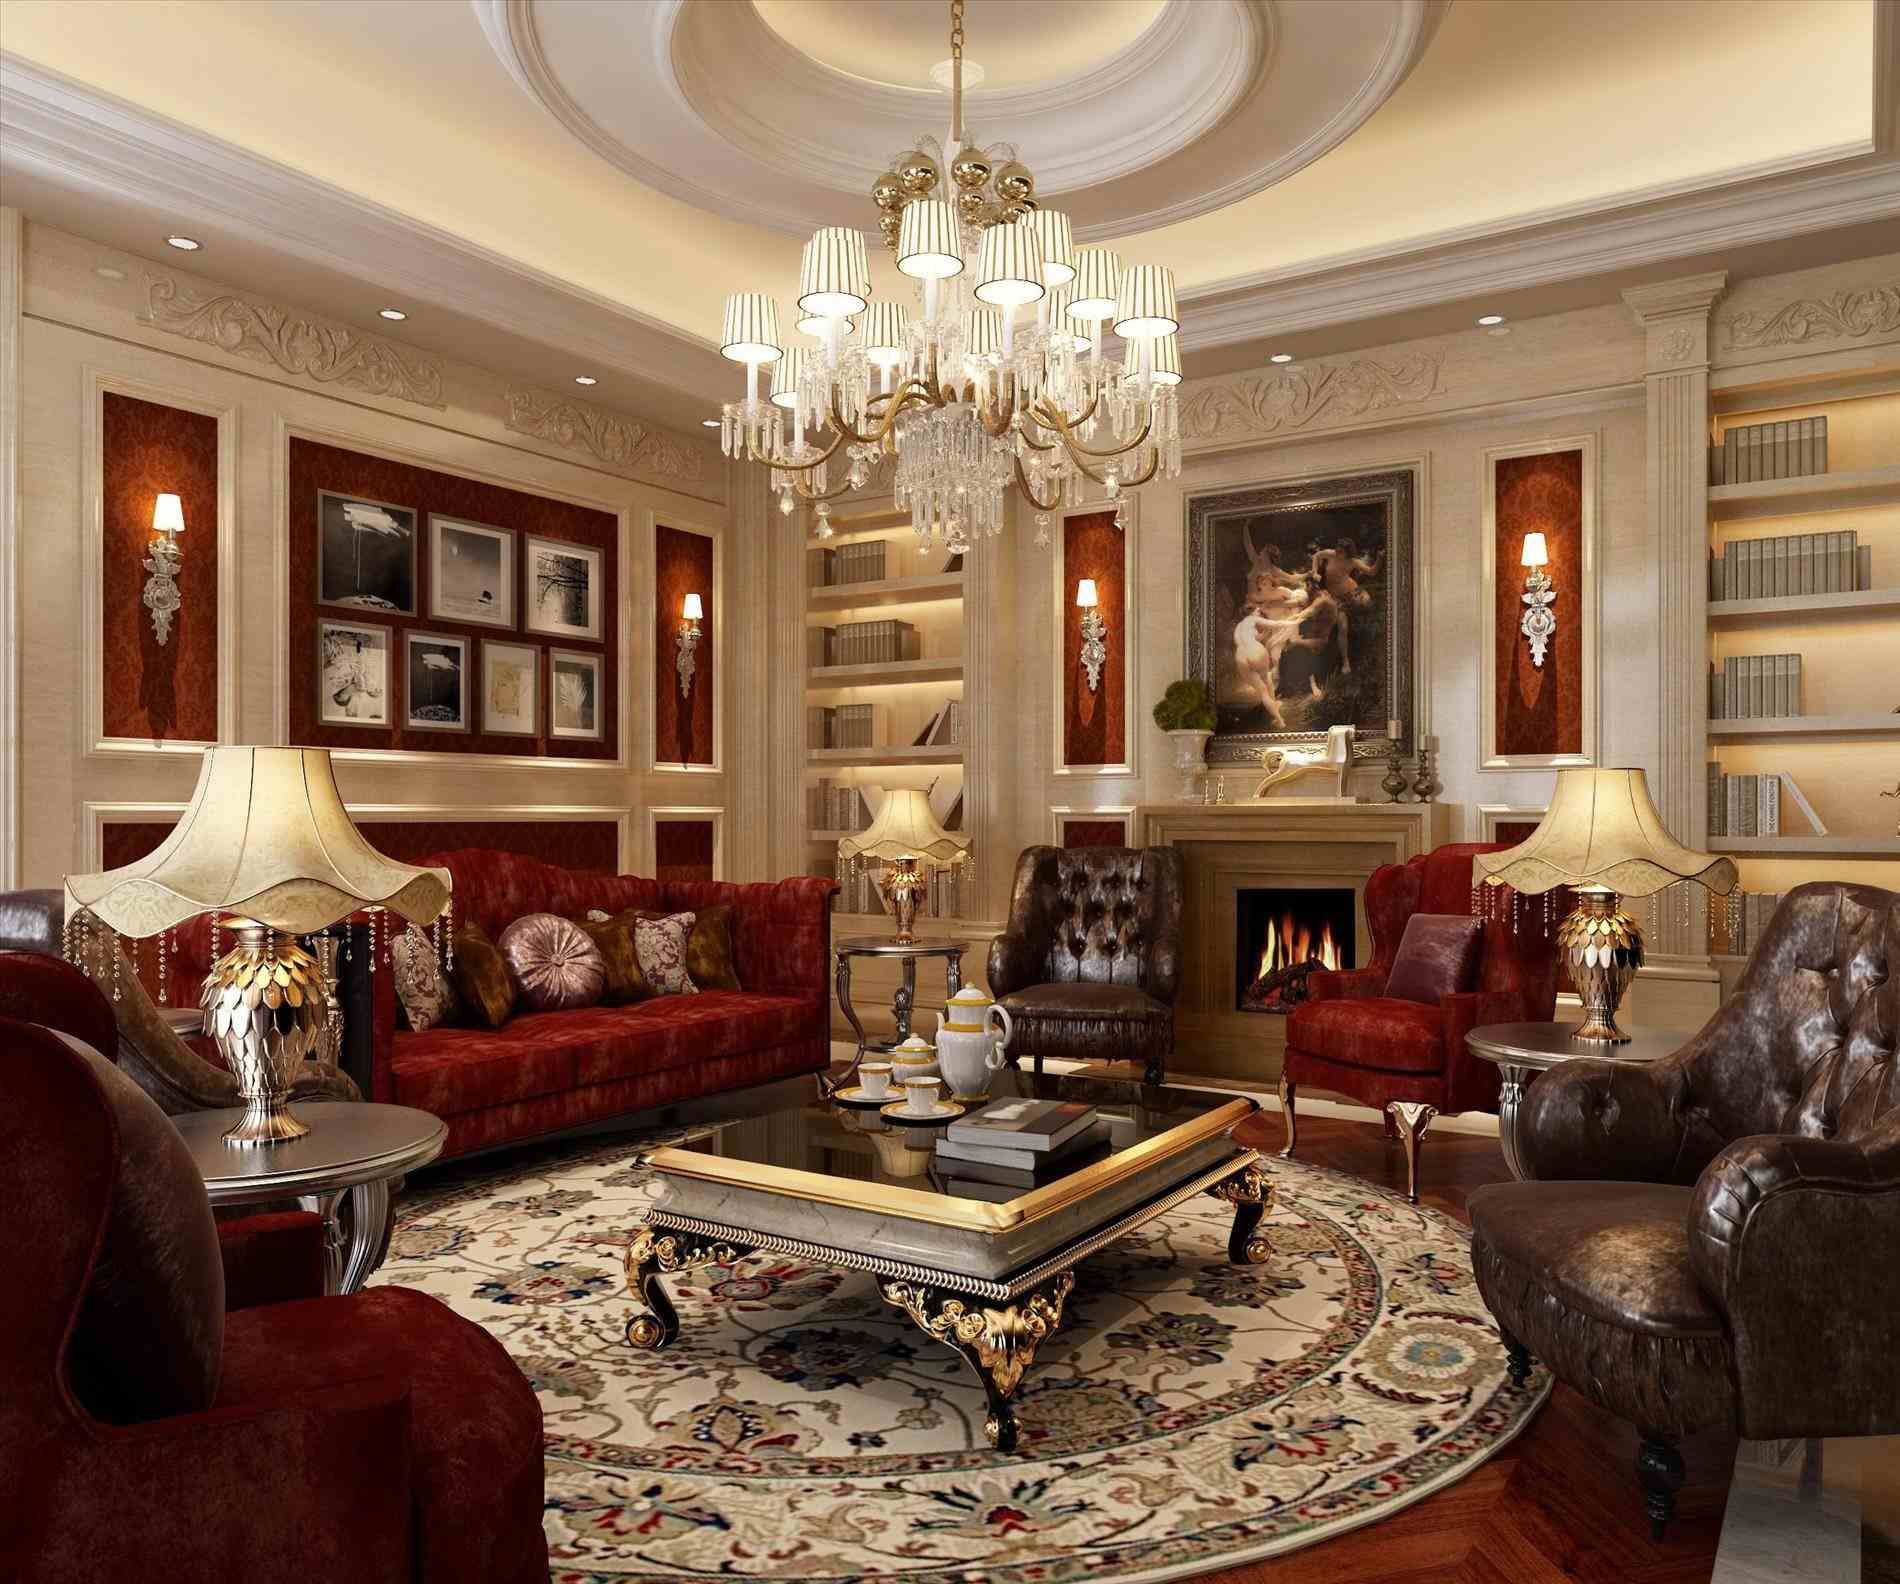 Entertaining In Elegance: Luxury Lounge And Living Room Ideas